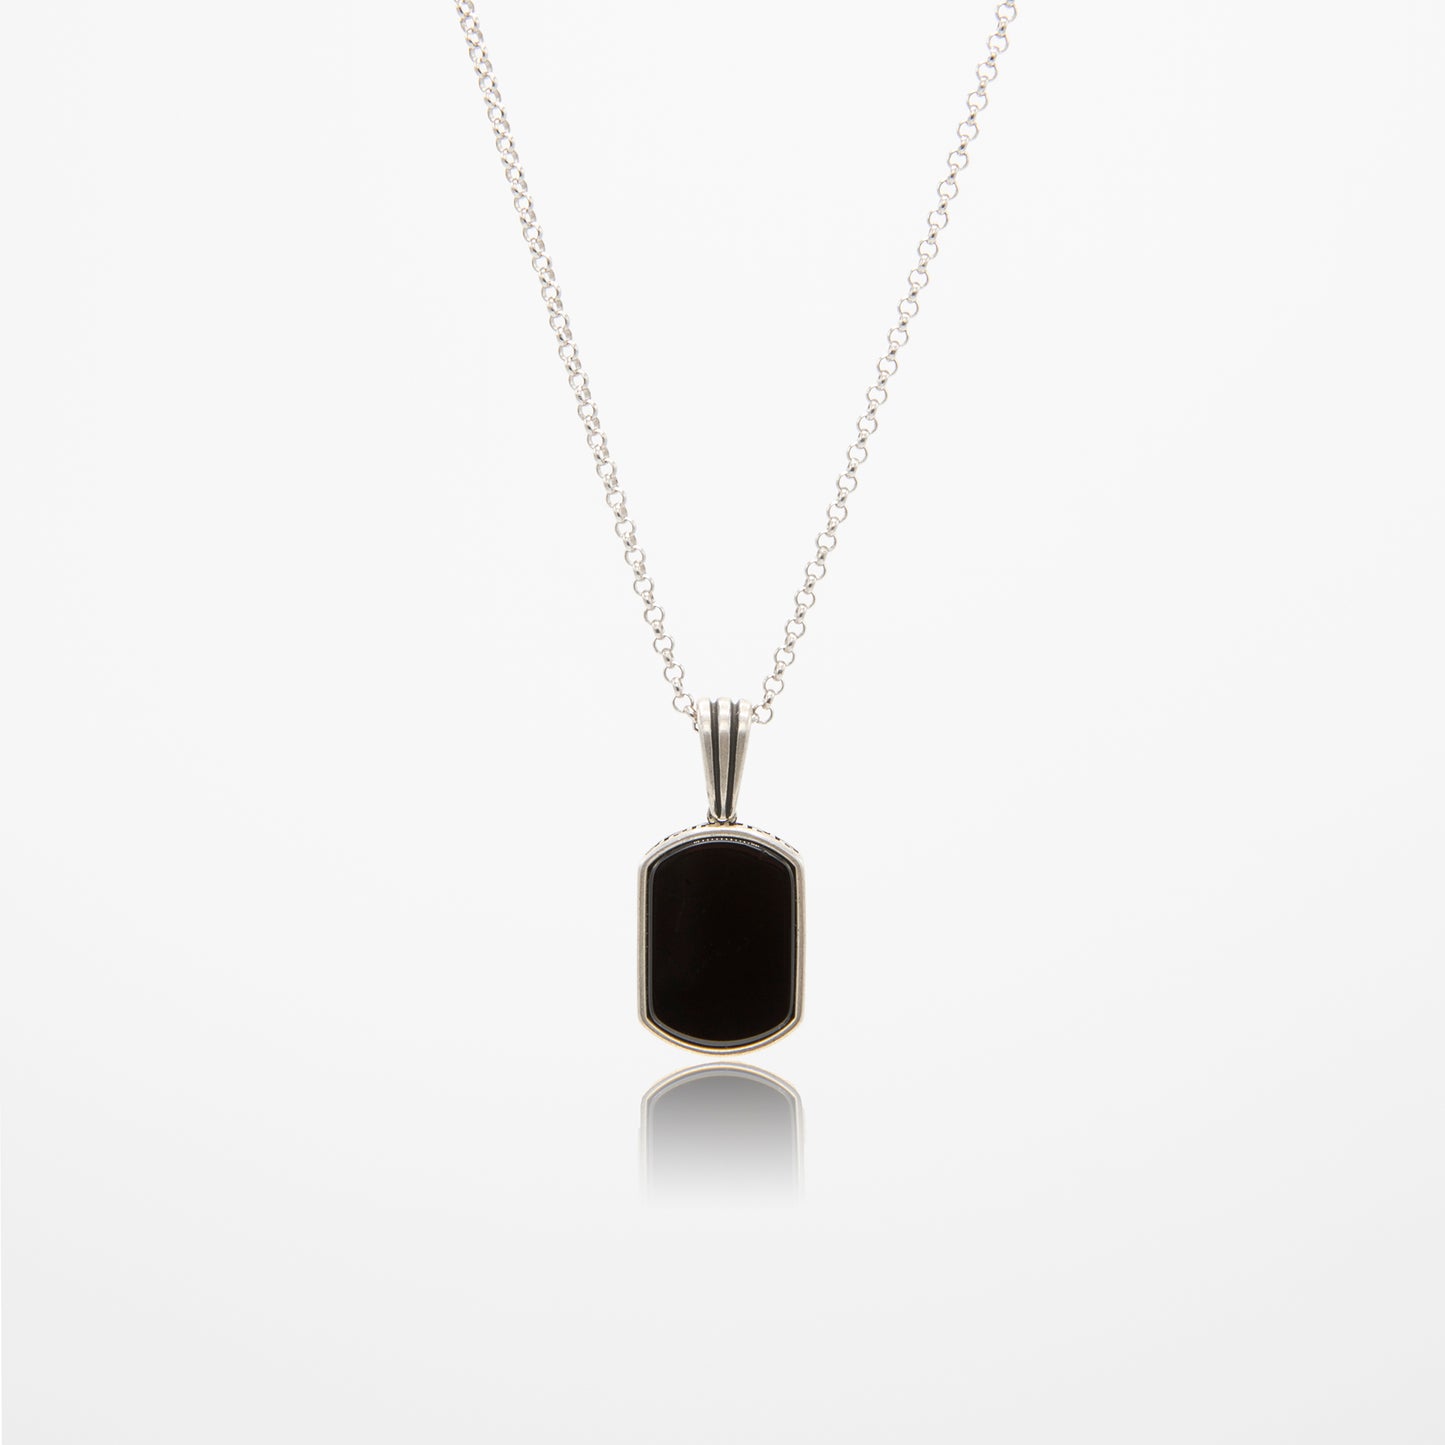 Premium Onyx Beverly Pendant: 925 Sterling Silver with High-Quality Rhodium-Plated Silver Circle Rolo Link Chain